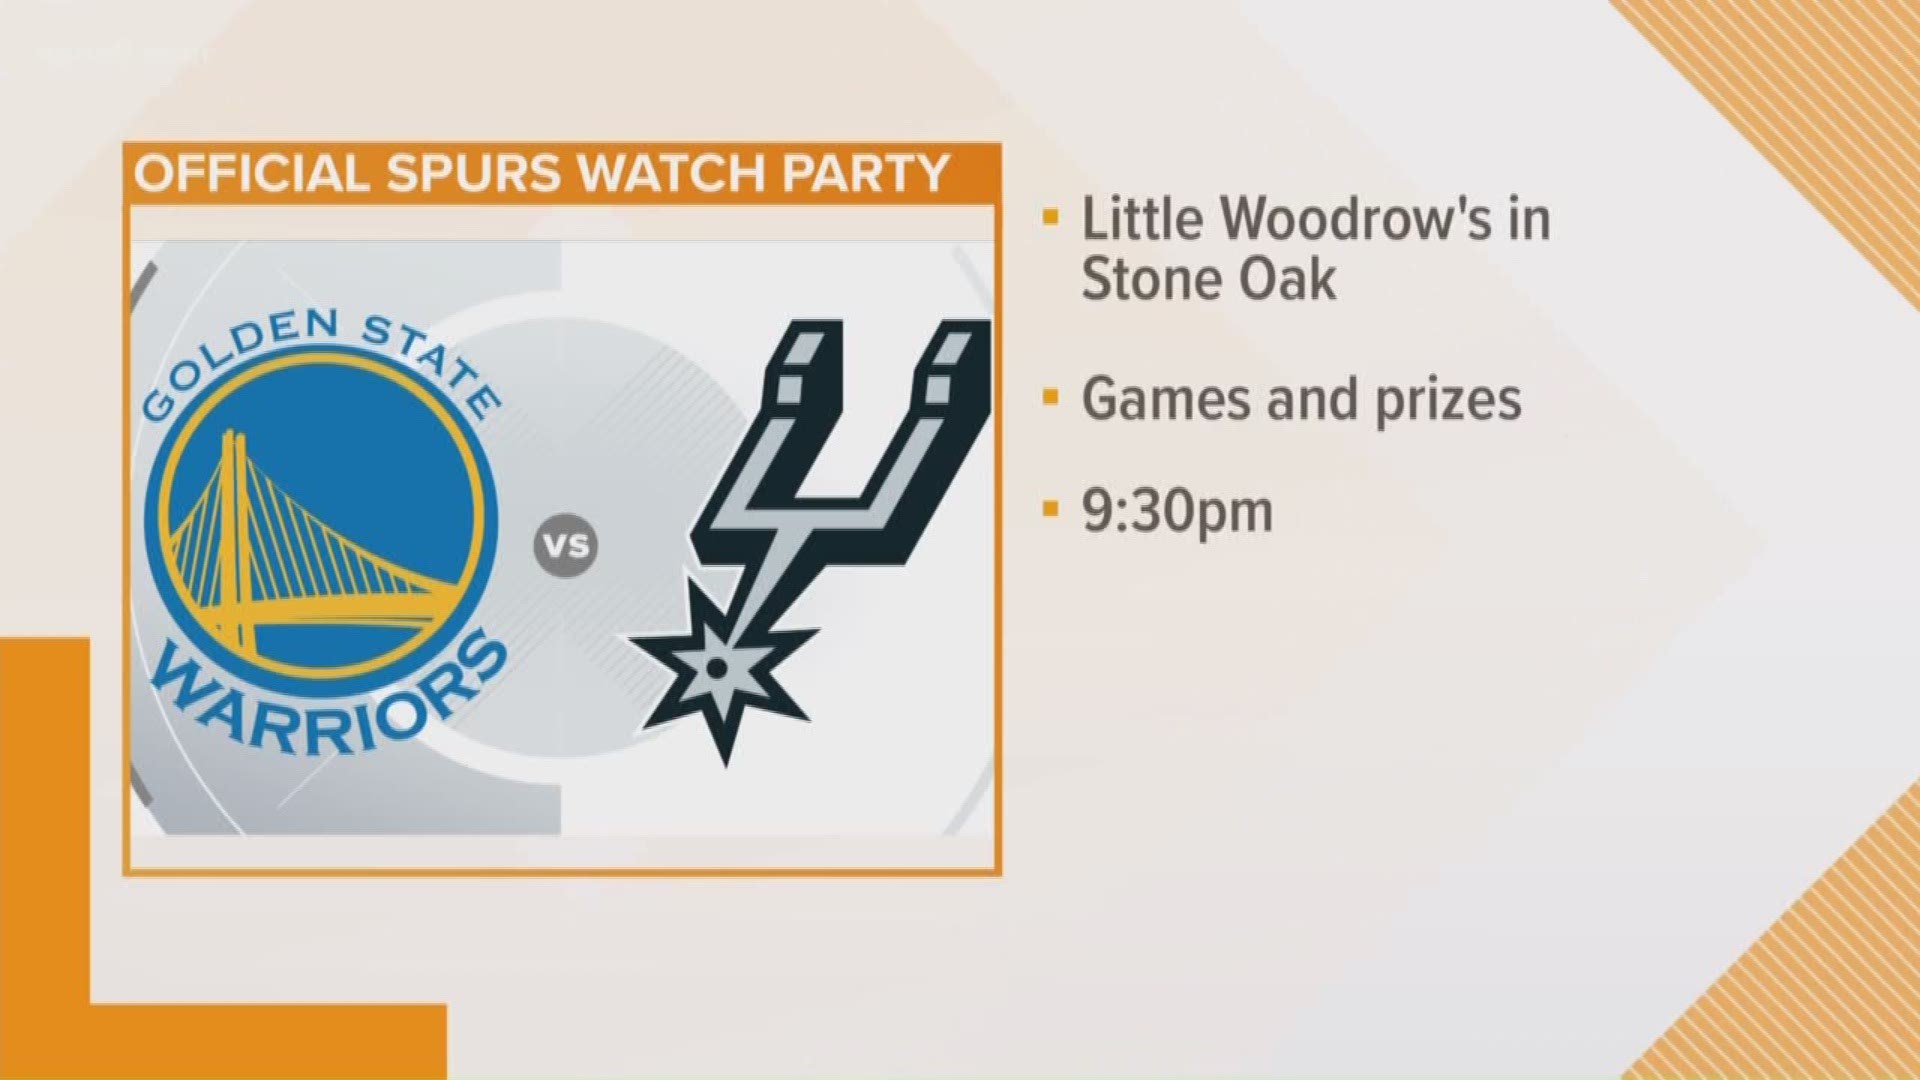 You can still cheer on the Silver and Black right here in San Antonio for Game 5 of the playoffs. There is a watch party at Little Woodrows in Stone Oak. Tip-off is at 9:30 p.m.